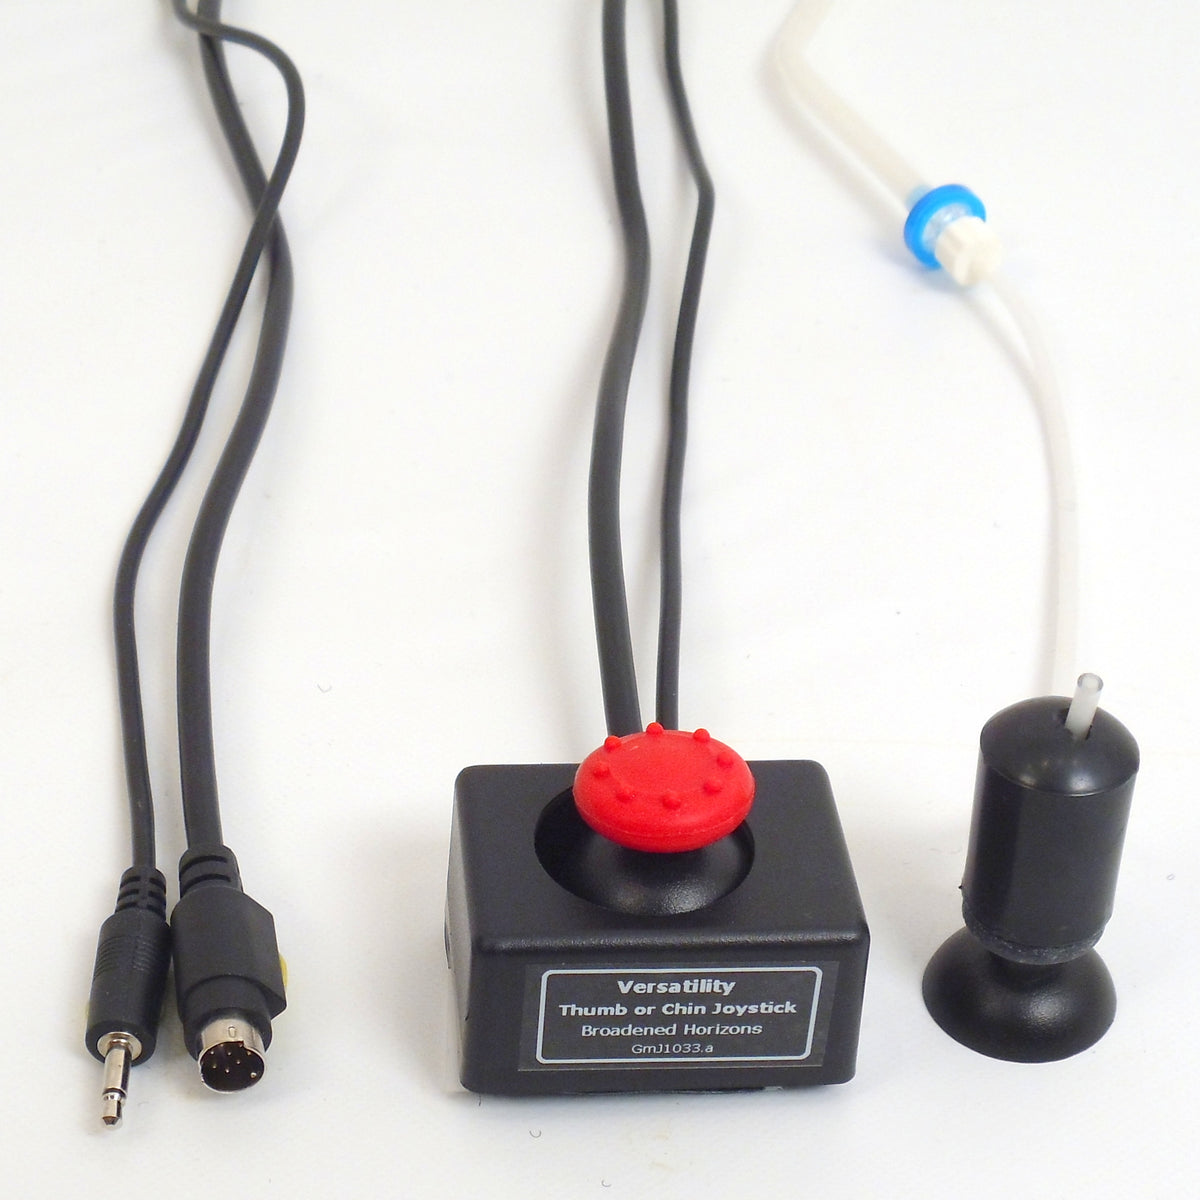 Versatility Thumb, Mouth, Chin, or Finger Mini OEM-Style Joystick with Integrated Sip-n-Puff Tubing plus Joy Button - Broadened Horizons Direct